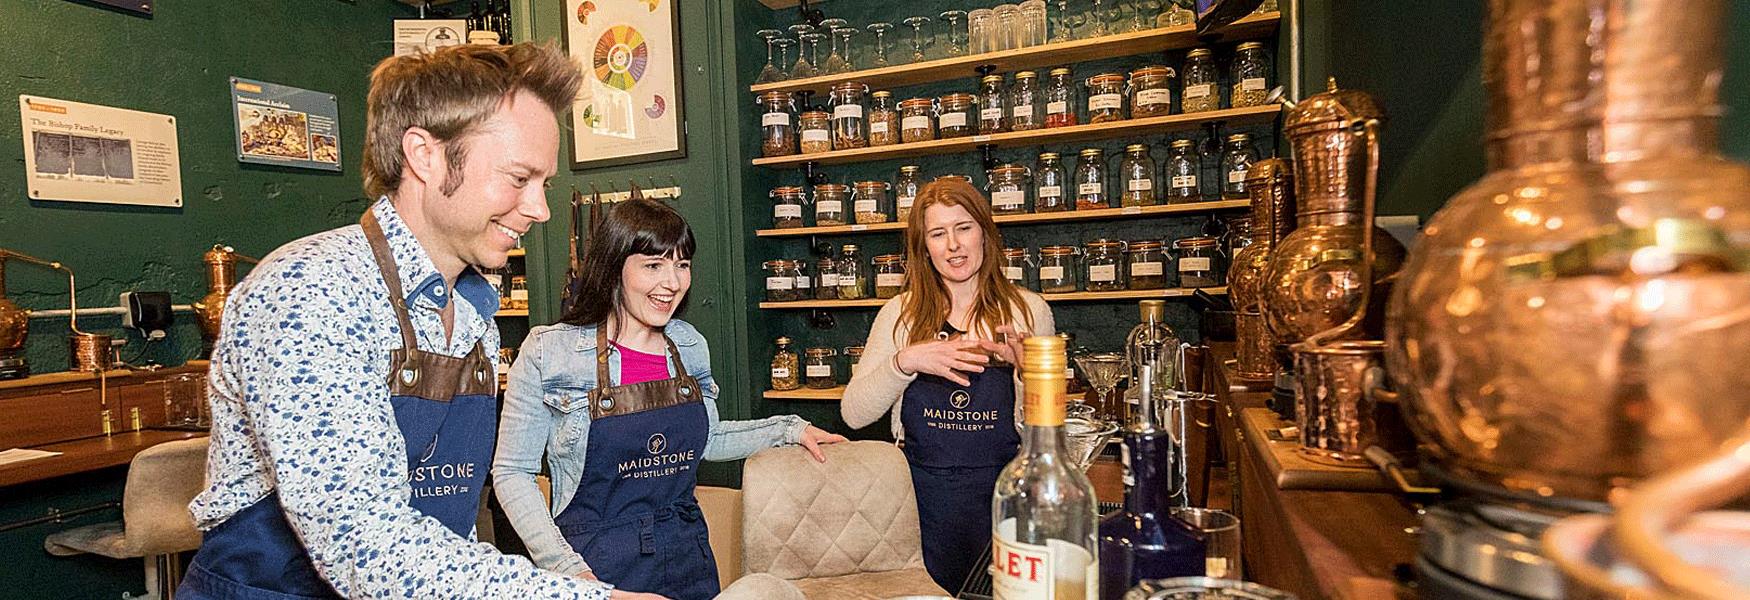 The gin making workshop at The Maidstone Distillery is brilliant fun and allows you to take part in Maidstone history for yourself.  Perfect for a winter afternoon and close to the station to get you home.